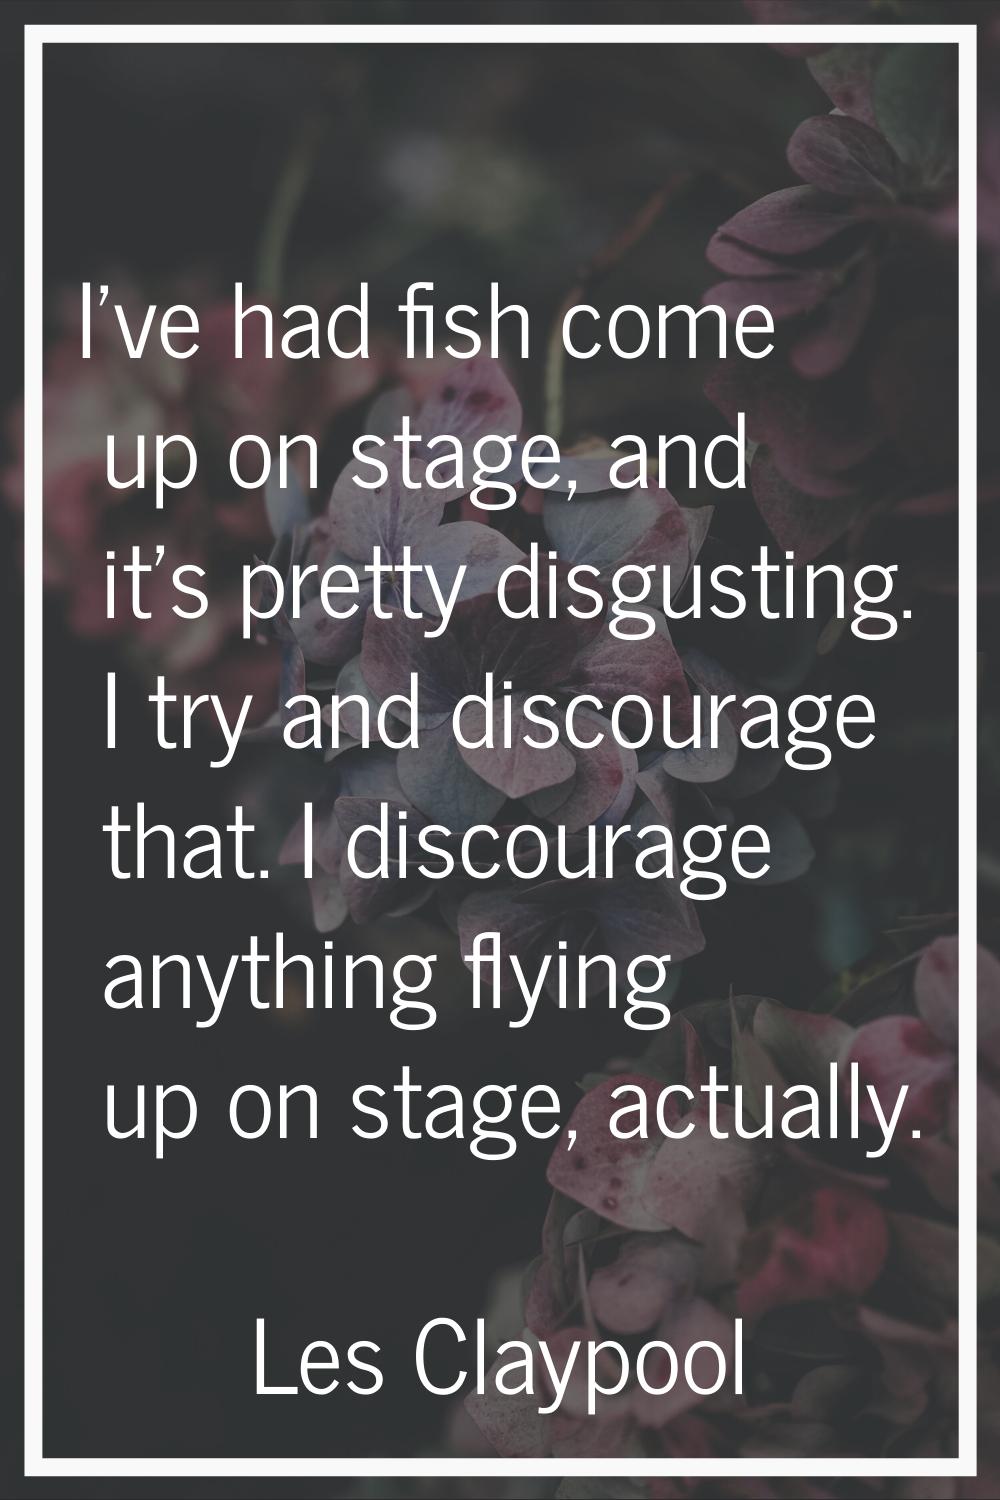 I've had fish come up on stage, and it's pretty disgusting. I try and discourage that. I discourage